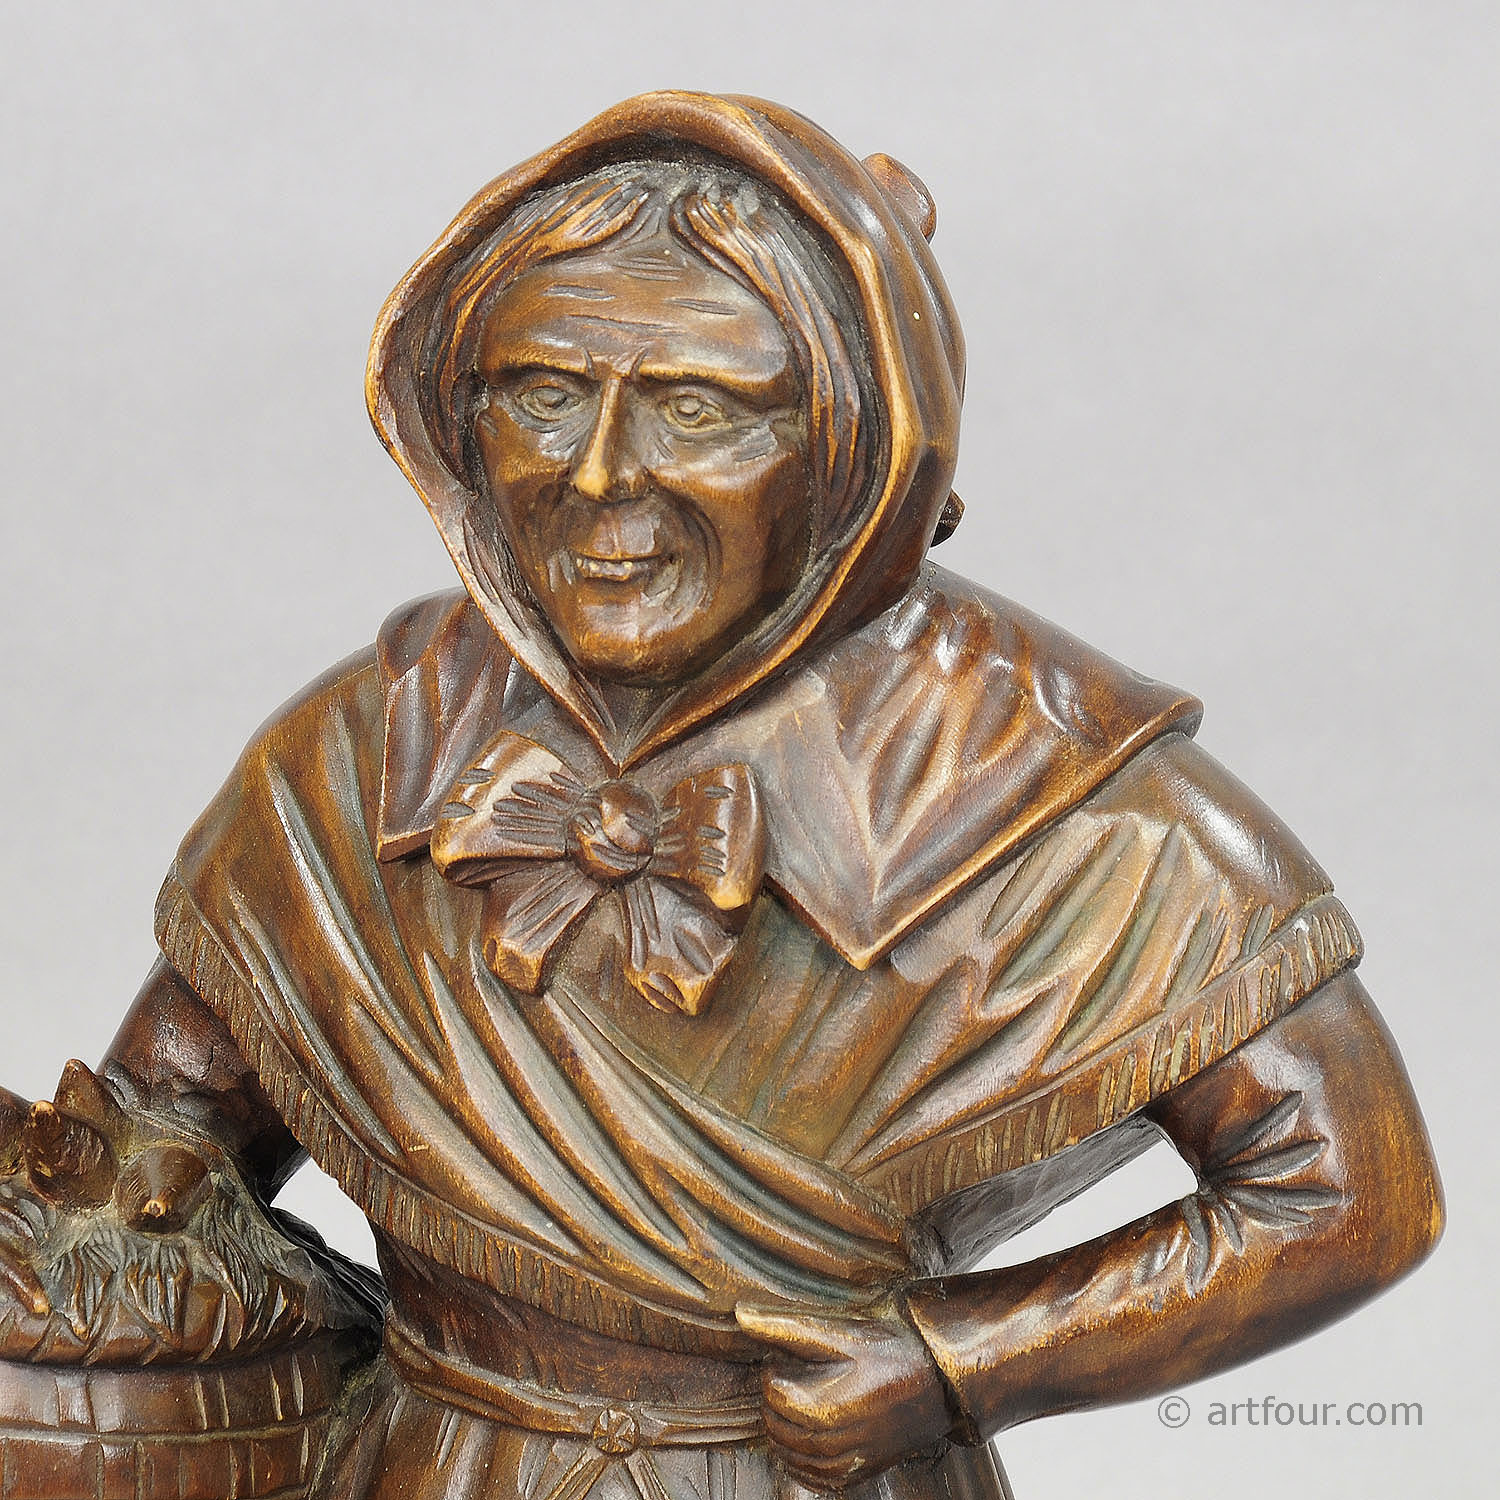 Antique Wooden Carved Sculpture of a Folksy Countrywoman